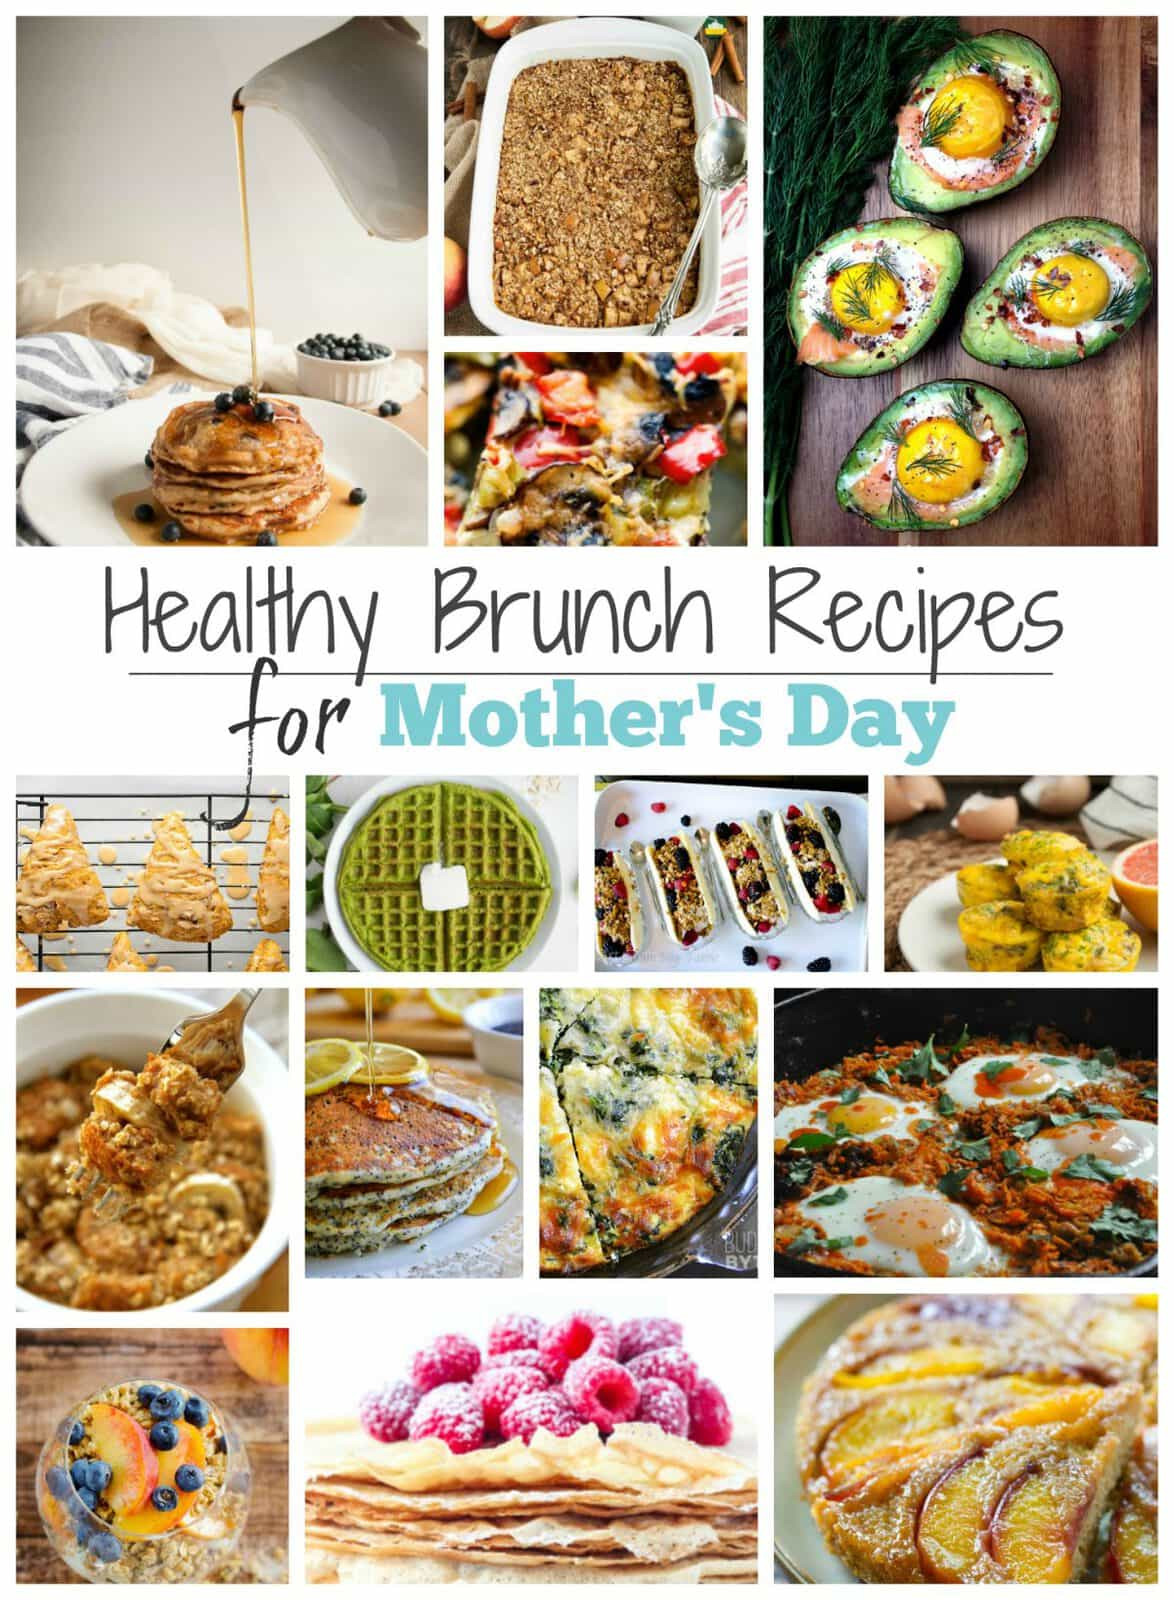 Mother'S Day Breakfast Recipes
 15 Healthy Brunch Recipes for Mother s Day Feasting not